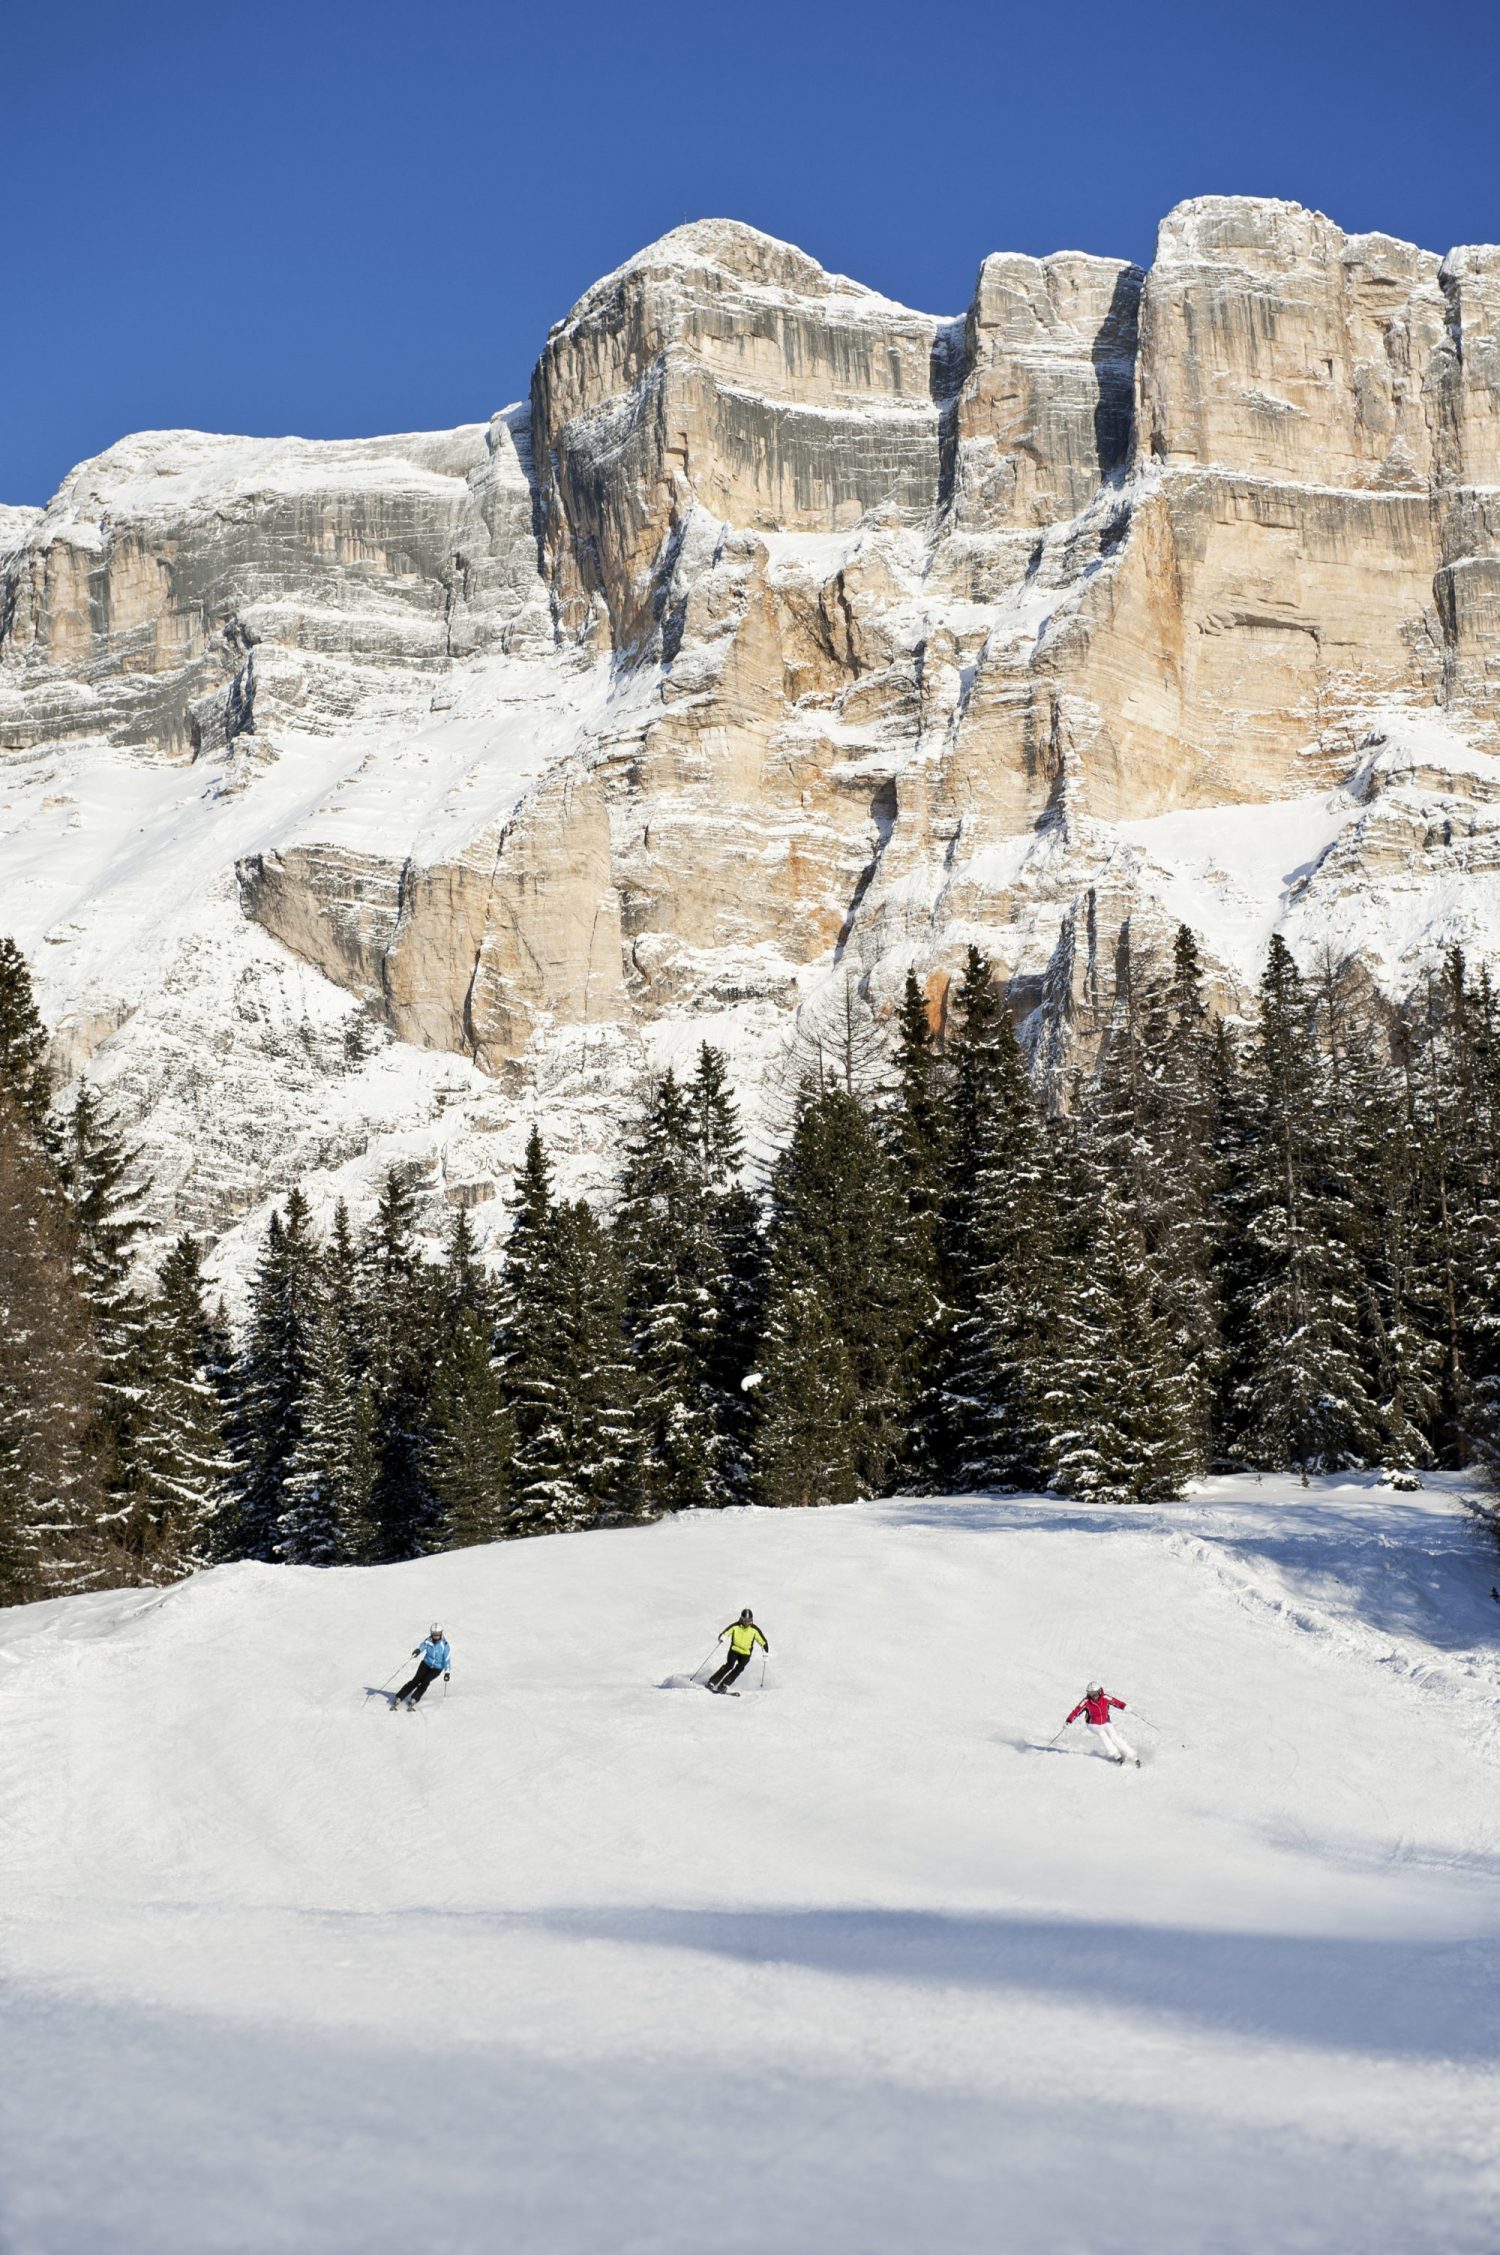 There’s nothing like a downhill run through fresh snow from Monte Croce in Alta Badia, beneath the rock faces of the Pale Mountains. Season Opening’s at the different ski resorts of Sudtirol and Christmas Markets.